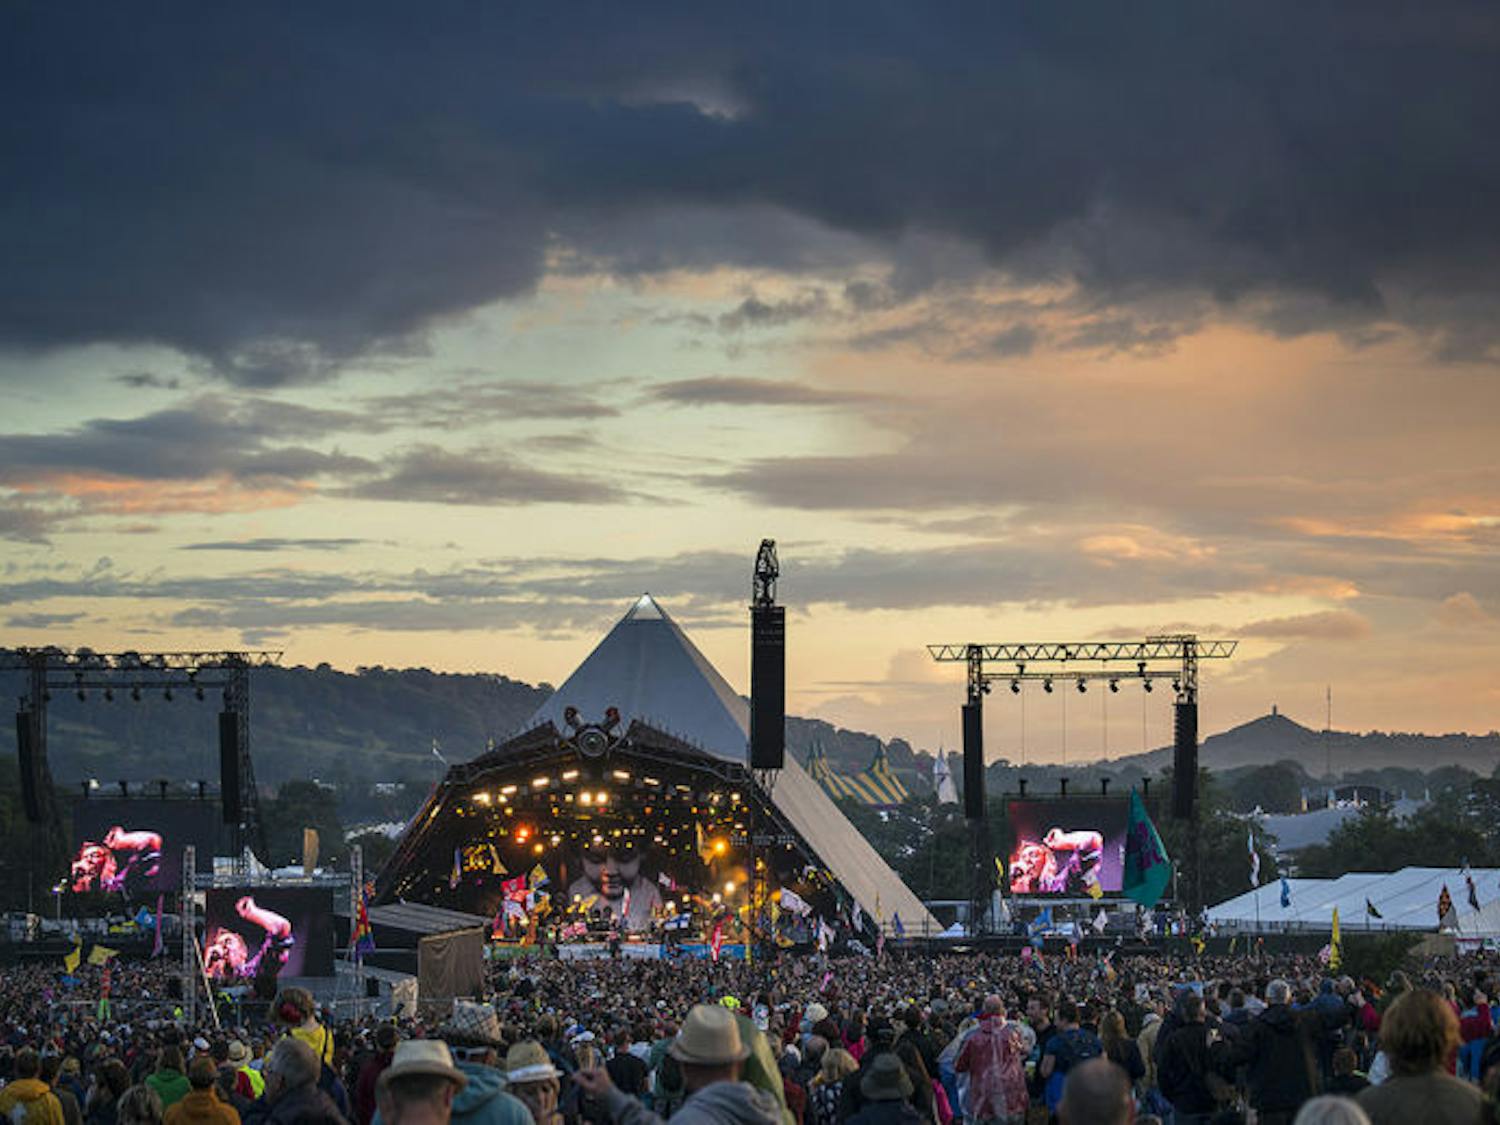 "'One Day Like This' - Elbow, Glastonbury Festival 2014" by Kris Williams